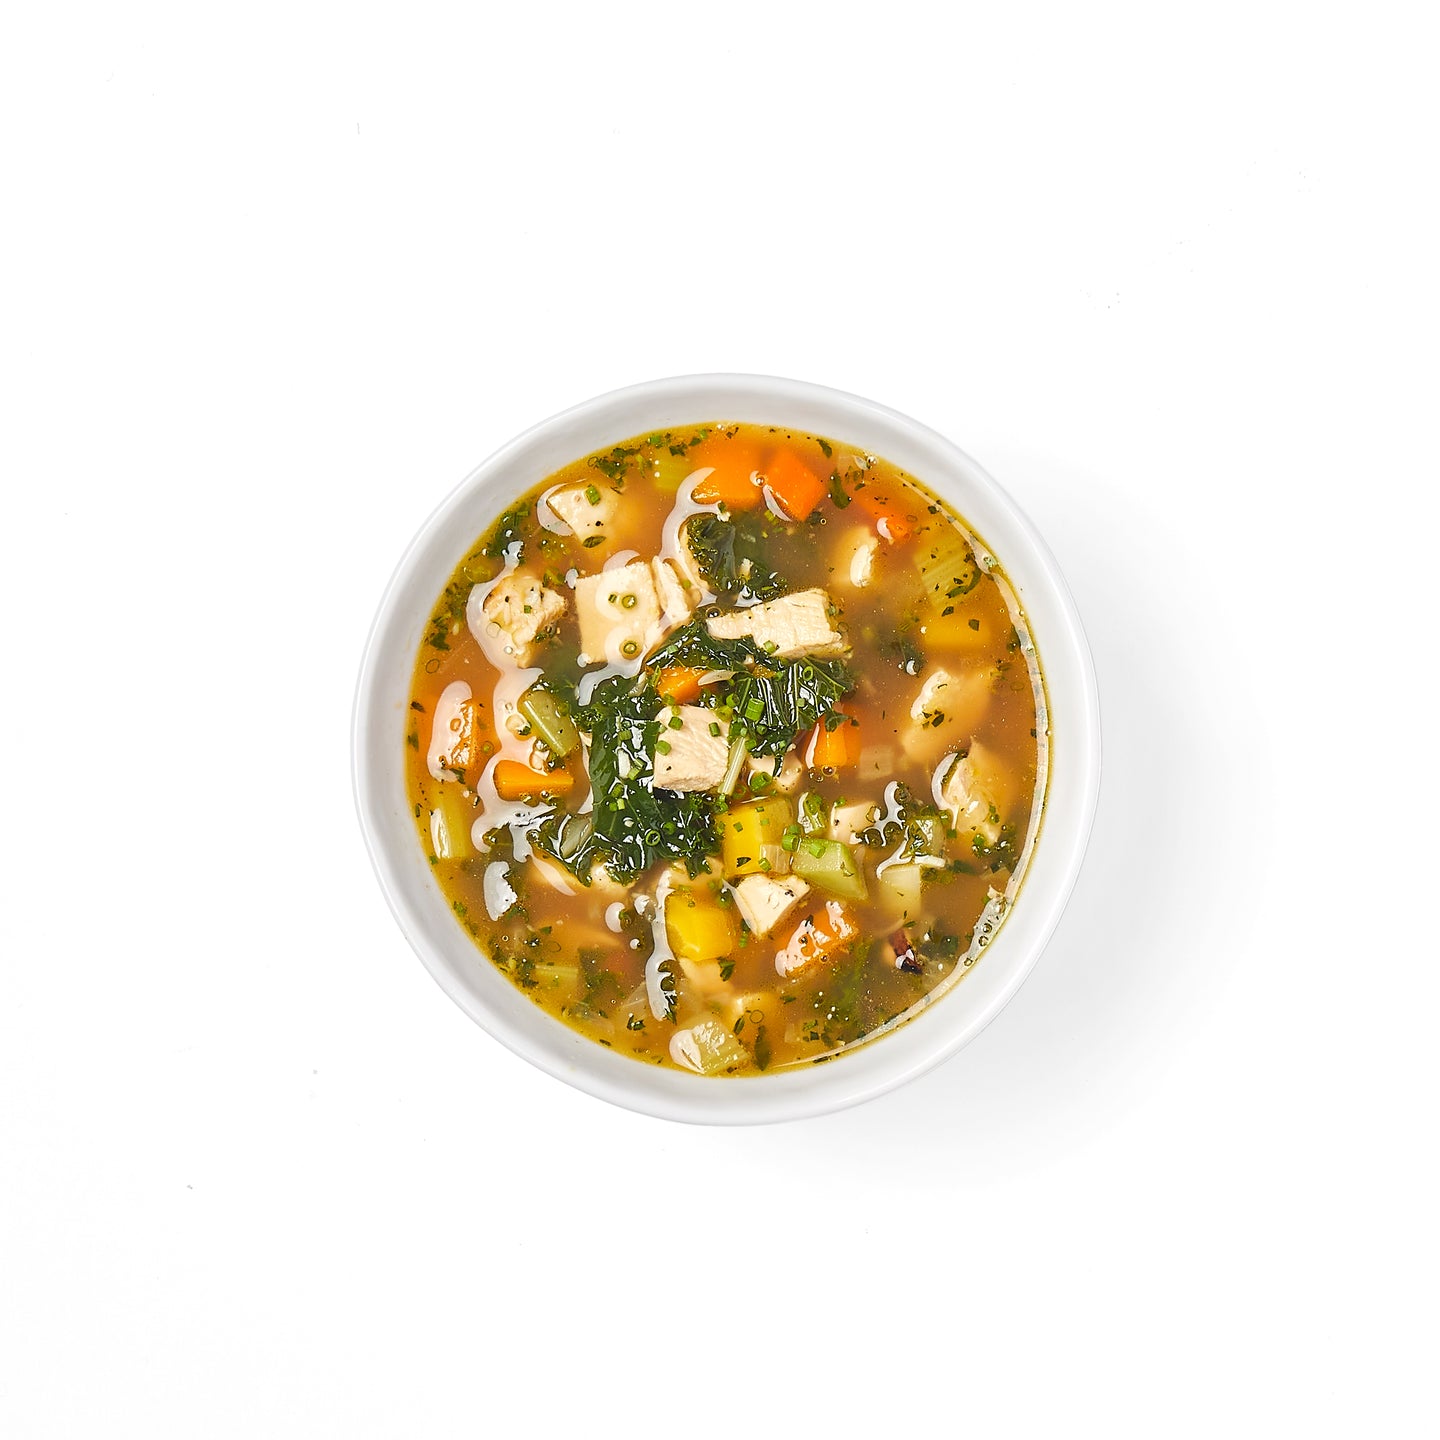 hearty chicken and vegetable stew azuluna foods Premium Pasture-Raised ready-to-eat Meals Delivery